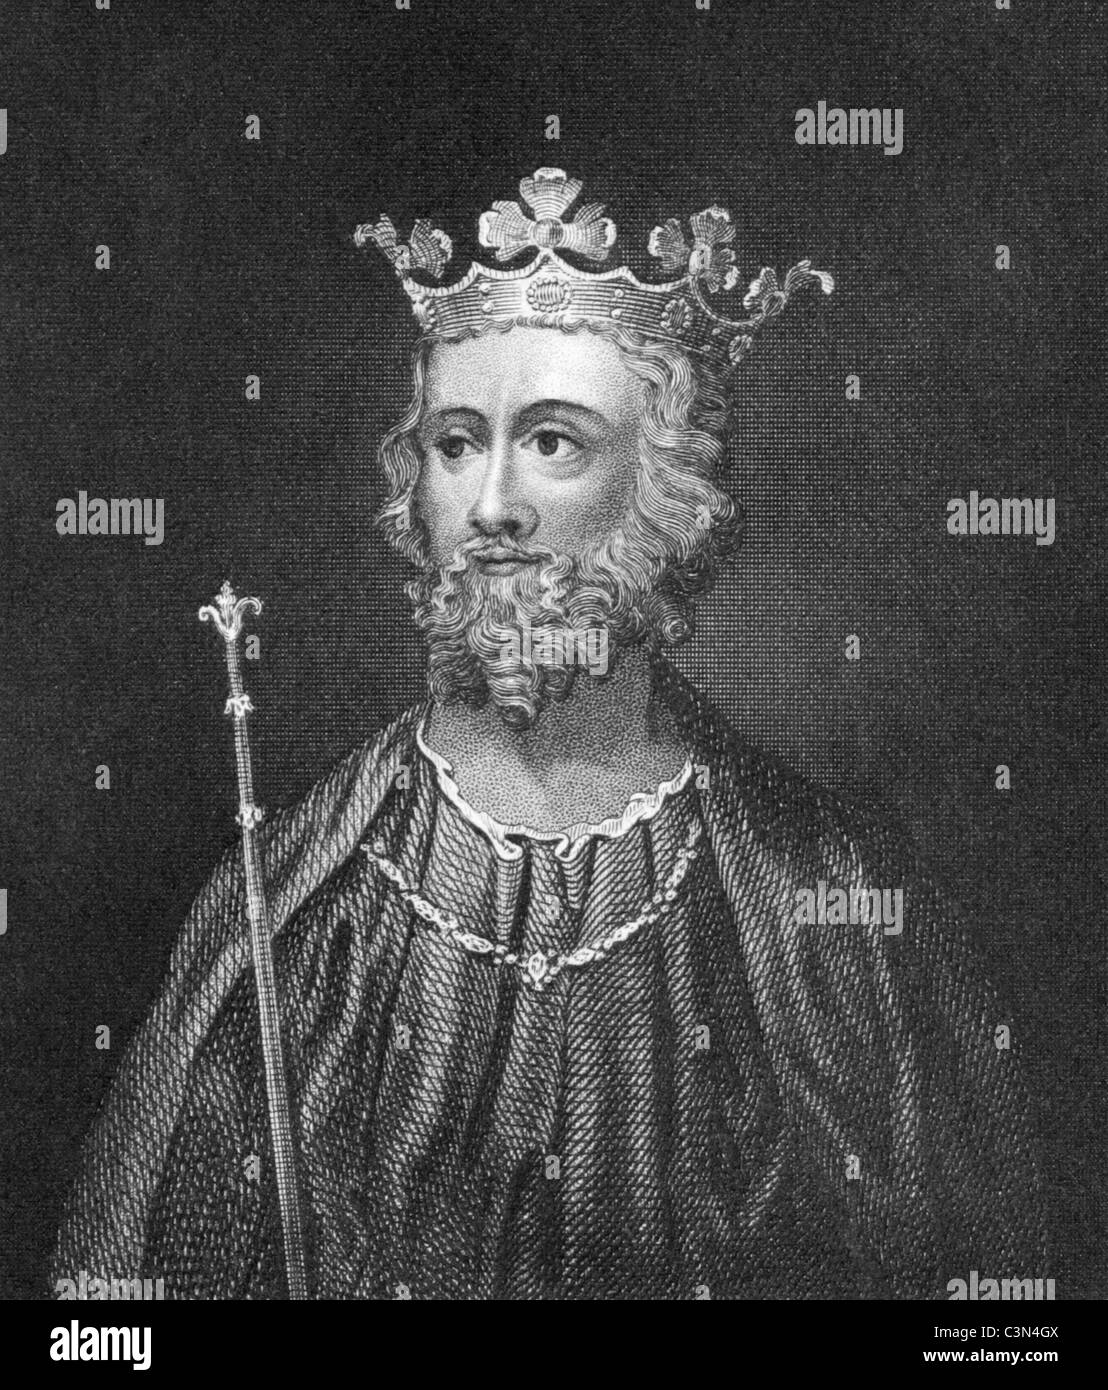 Edward II of England (1284-1327) on engraving from 1830. King of England during 1307-1327. Published in London by Thomas Kelly. Stock Photo